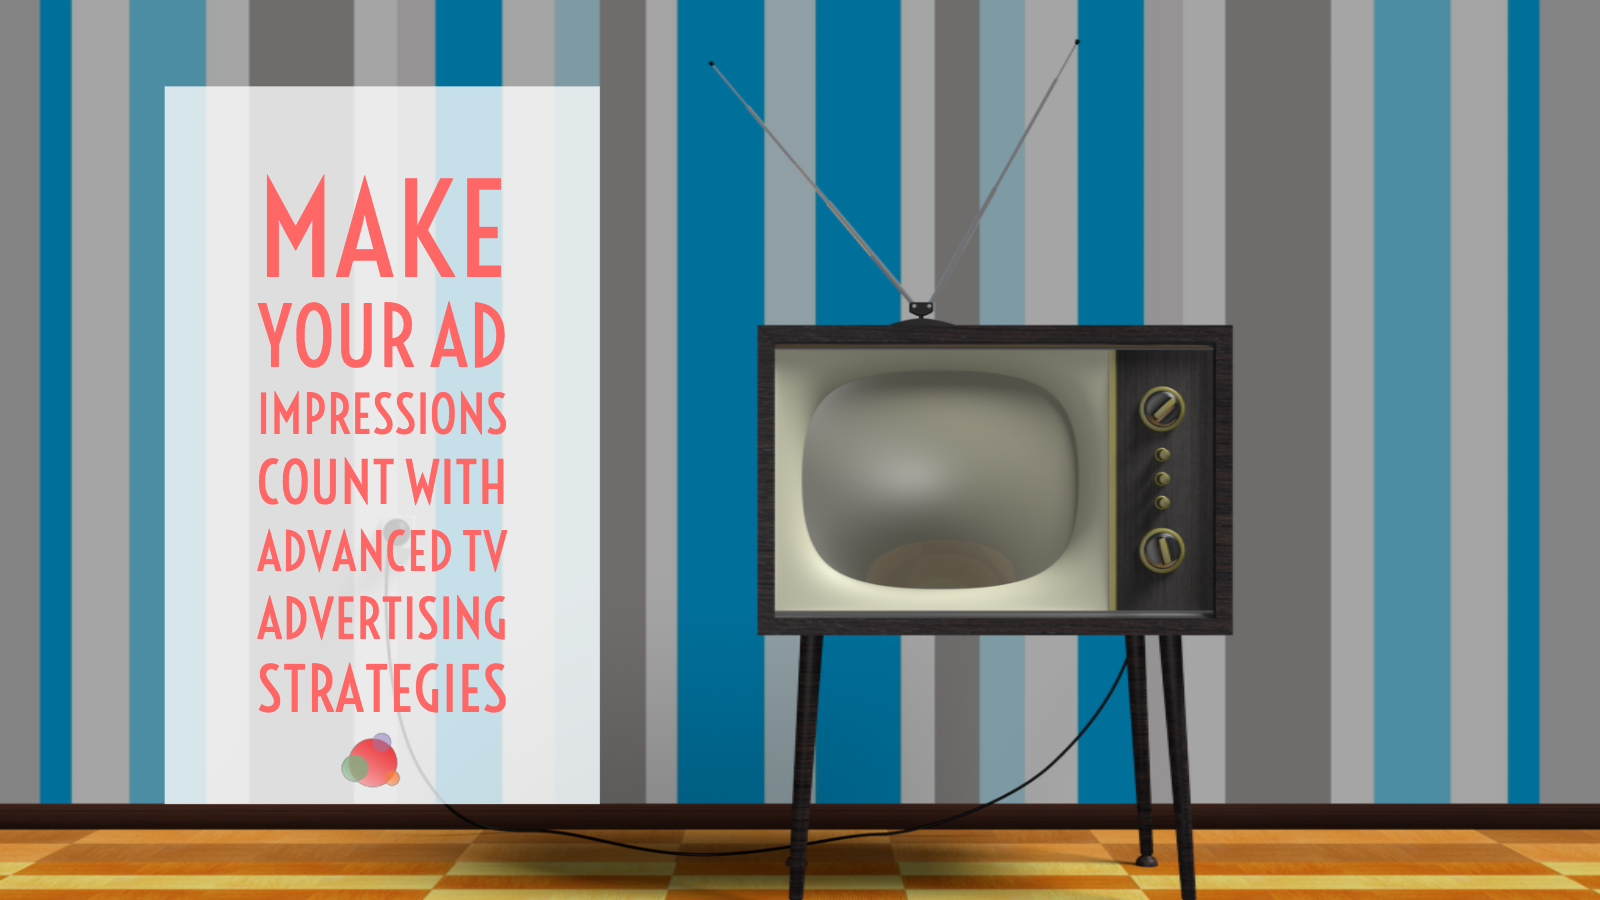 Make Ad Impressions Count with Advanced TV Strategies